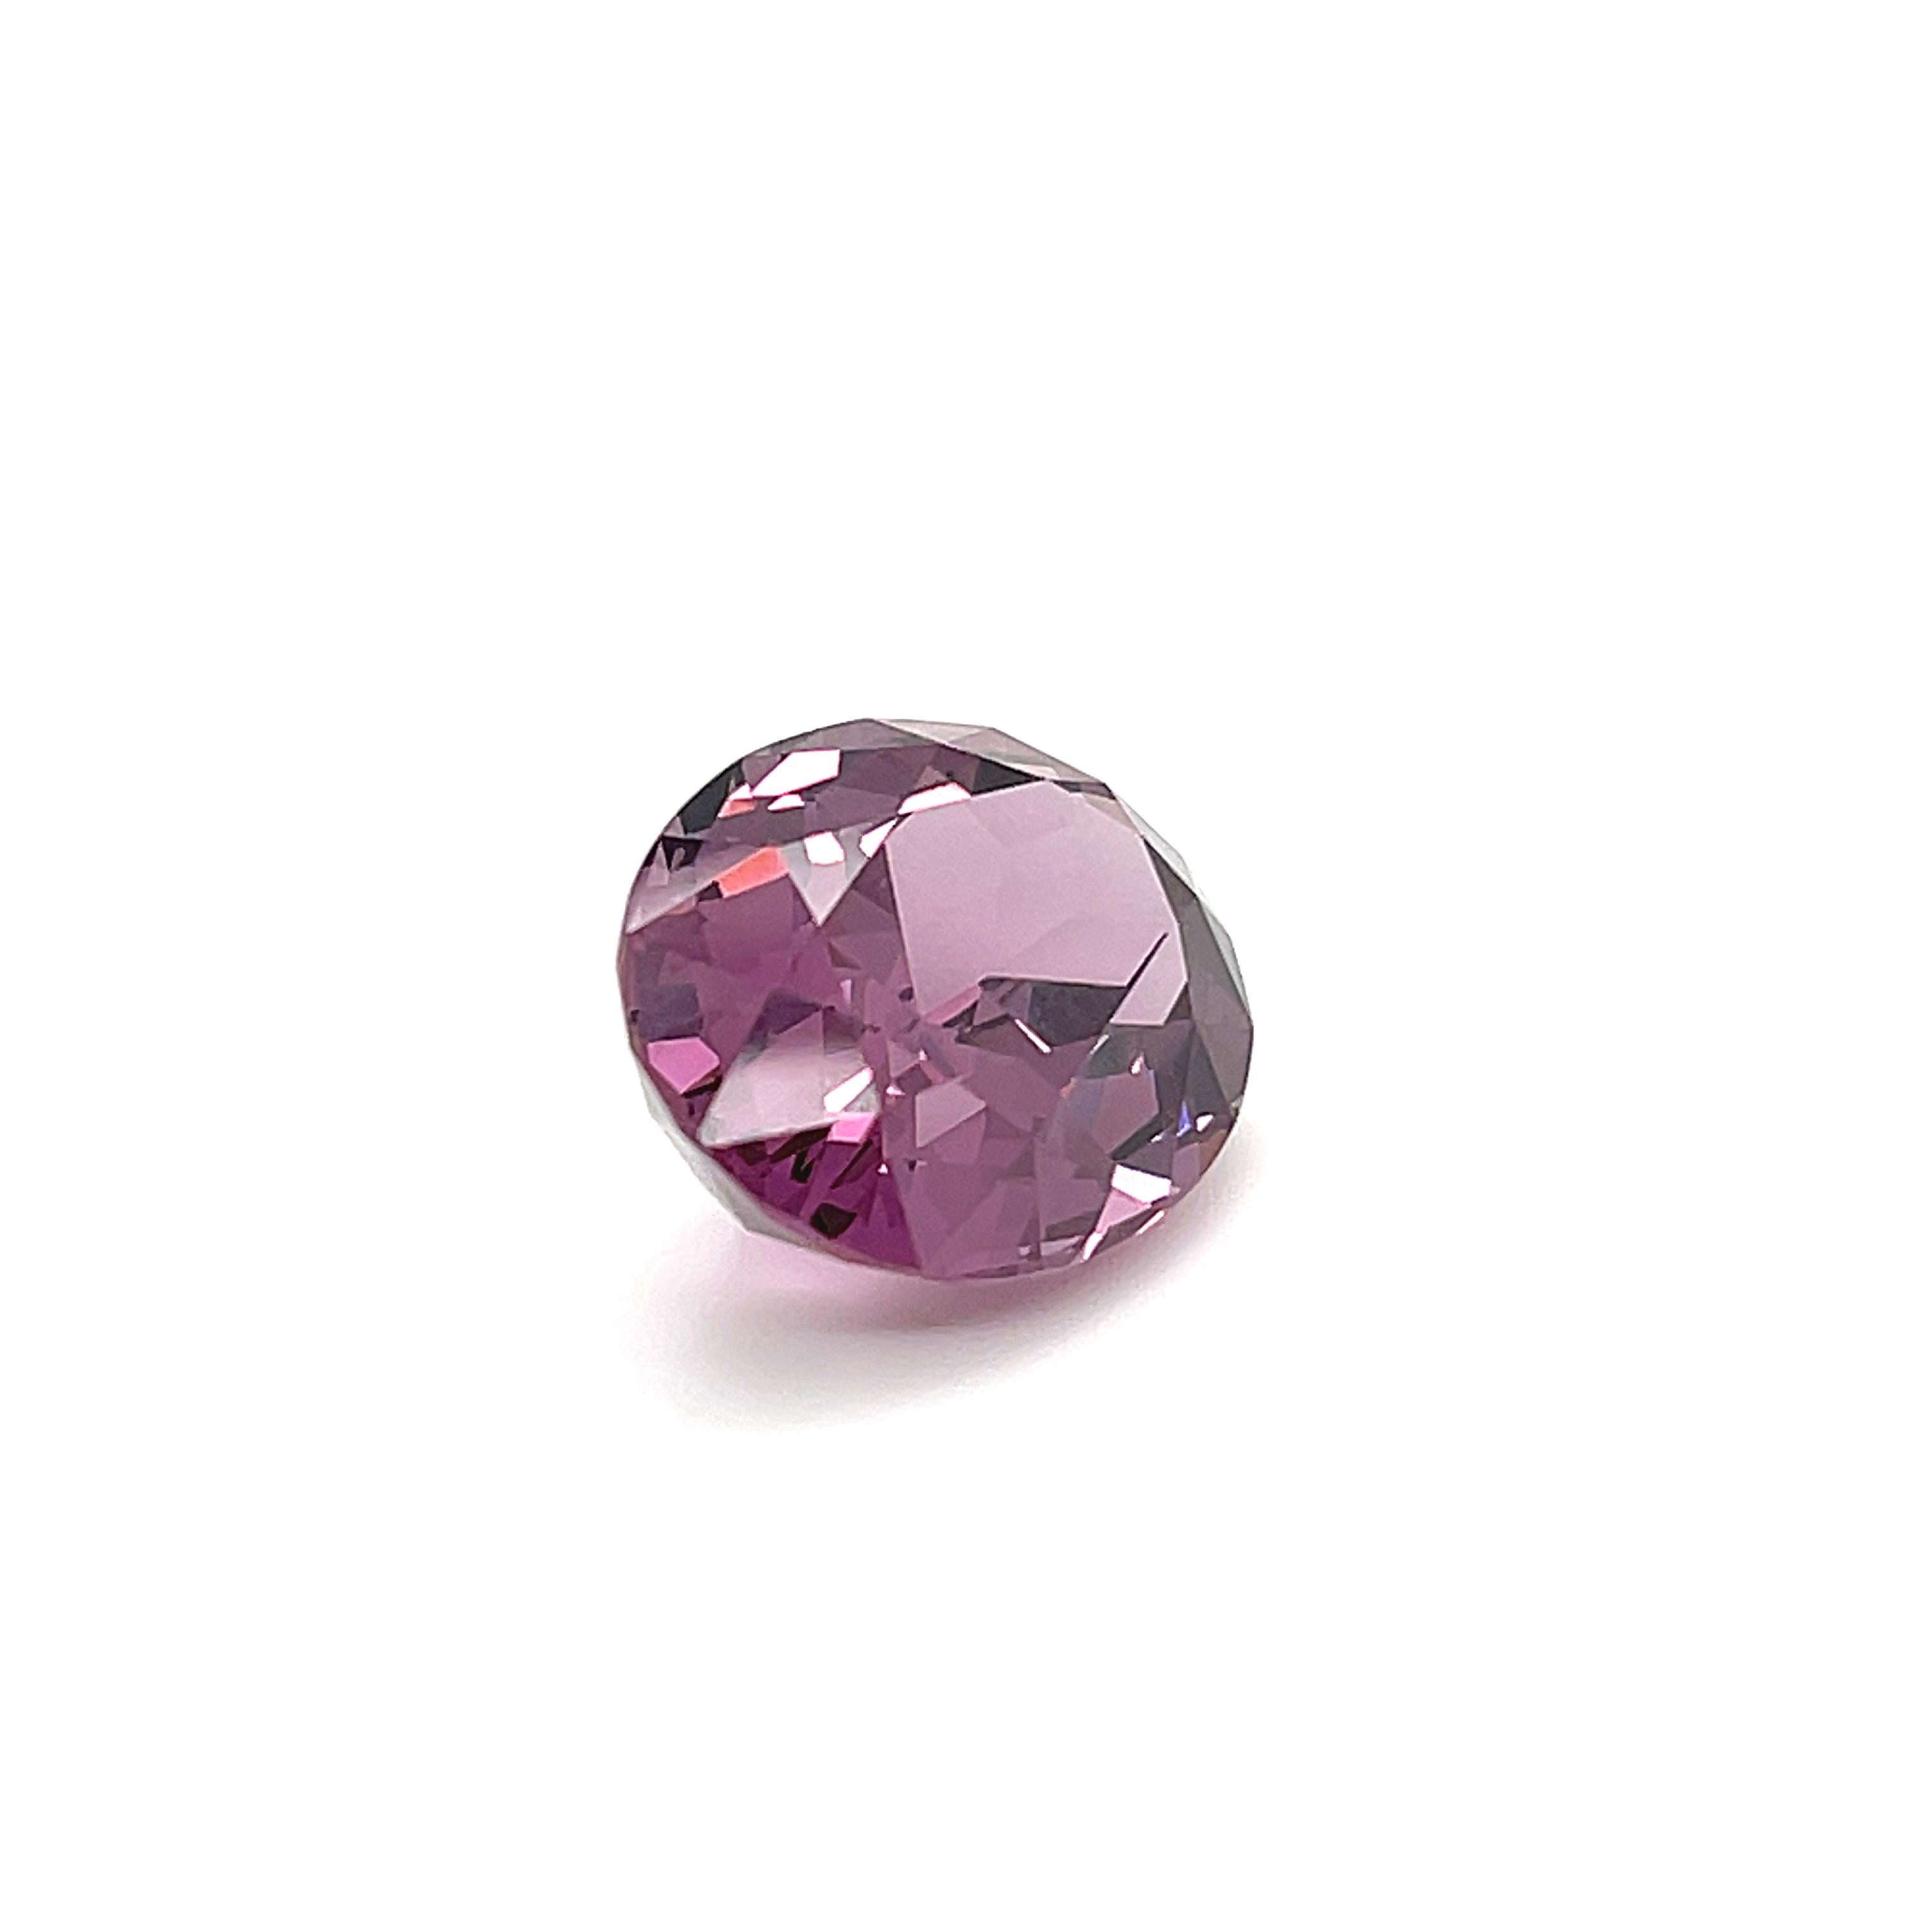 Contemporary Spinel 15.3 Carat Loose Gemstone For Sale